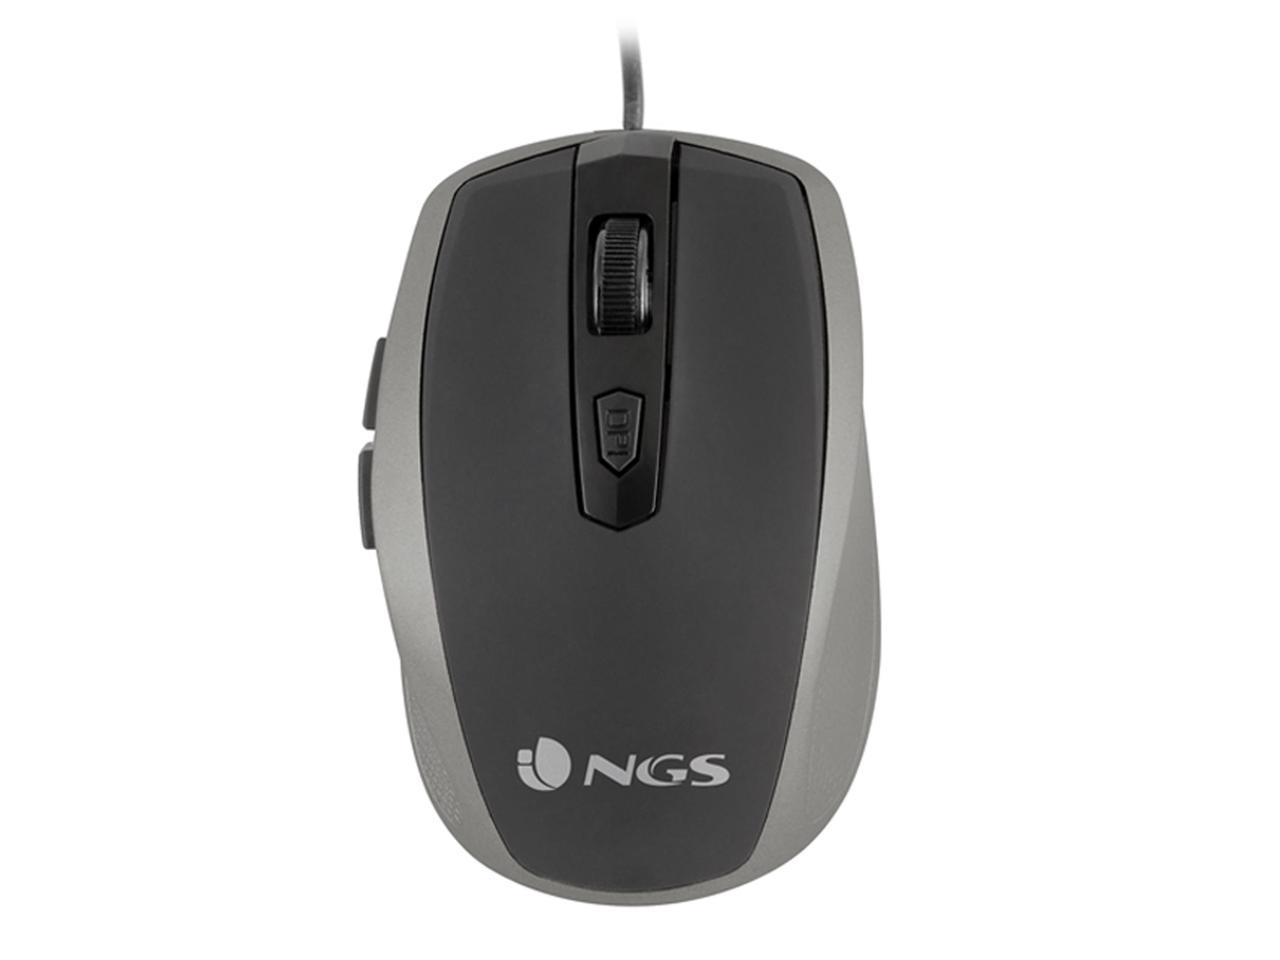 NGS Tick Wired Optical Gaming Mouse, 5 Buttons + Scroll Wheel - Silver